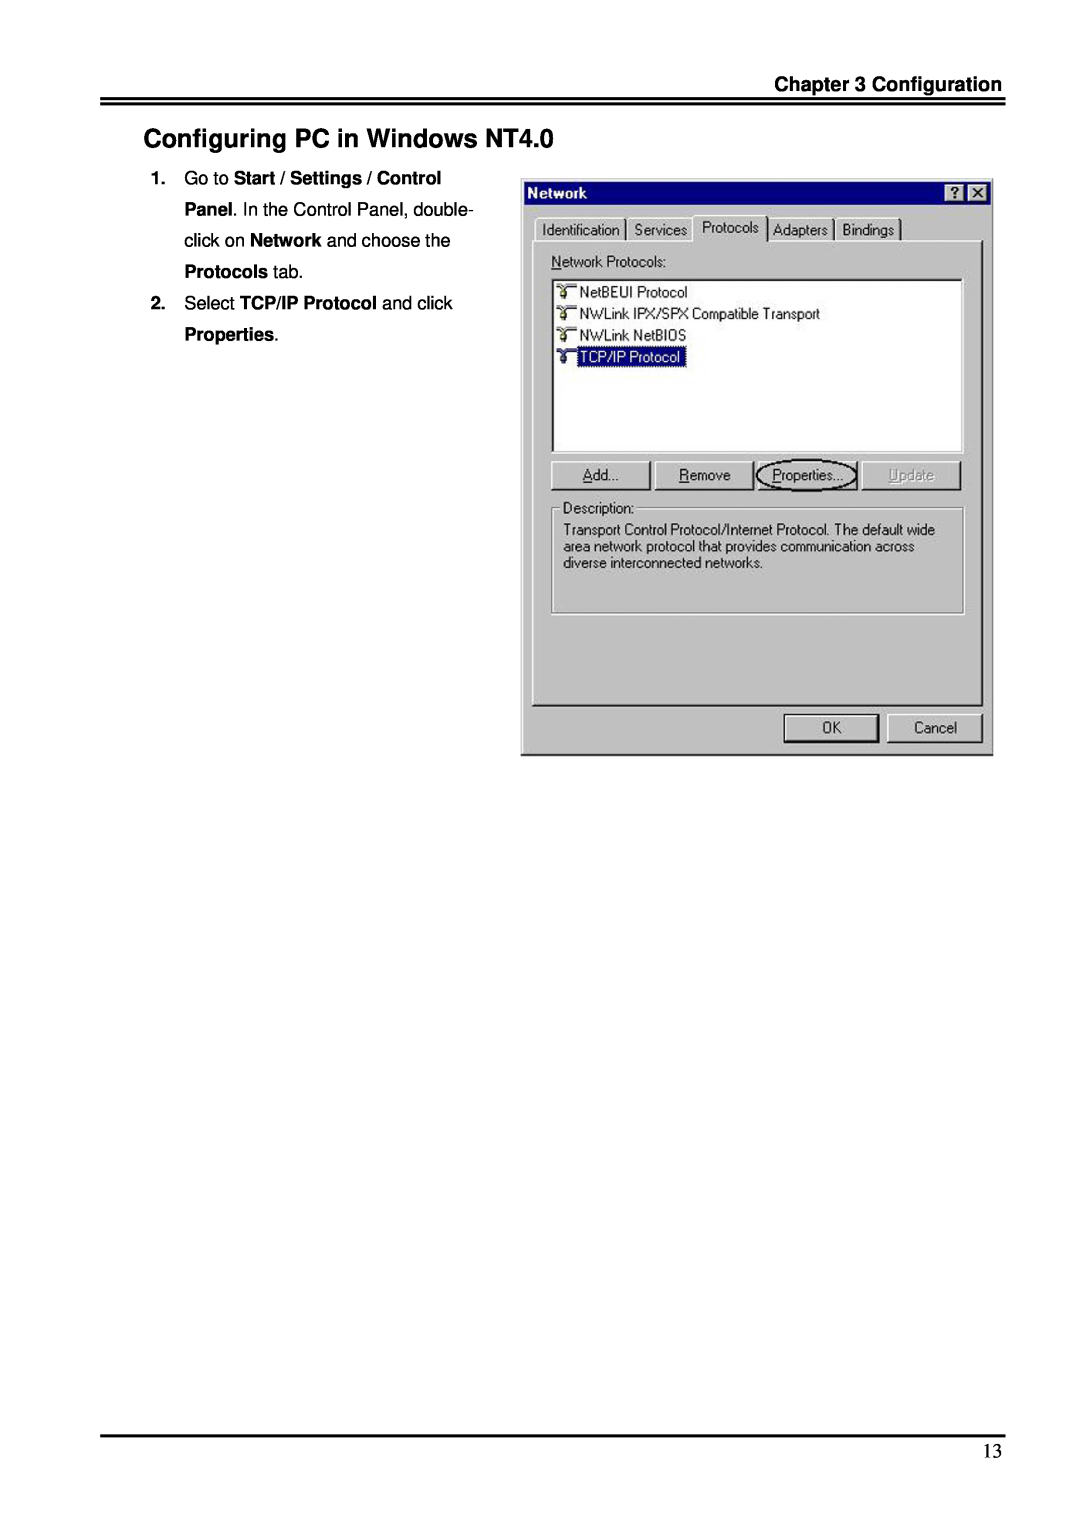 Billion Electric Company 7100S Configuring PC in Windows NT4.0, Configuration, Select TCP/IP Protocol and click Properties 